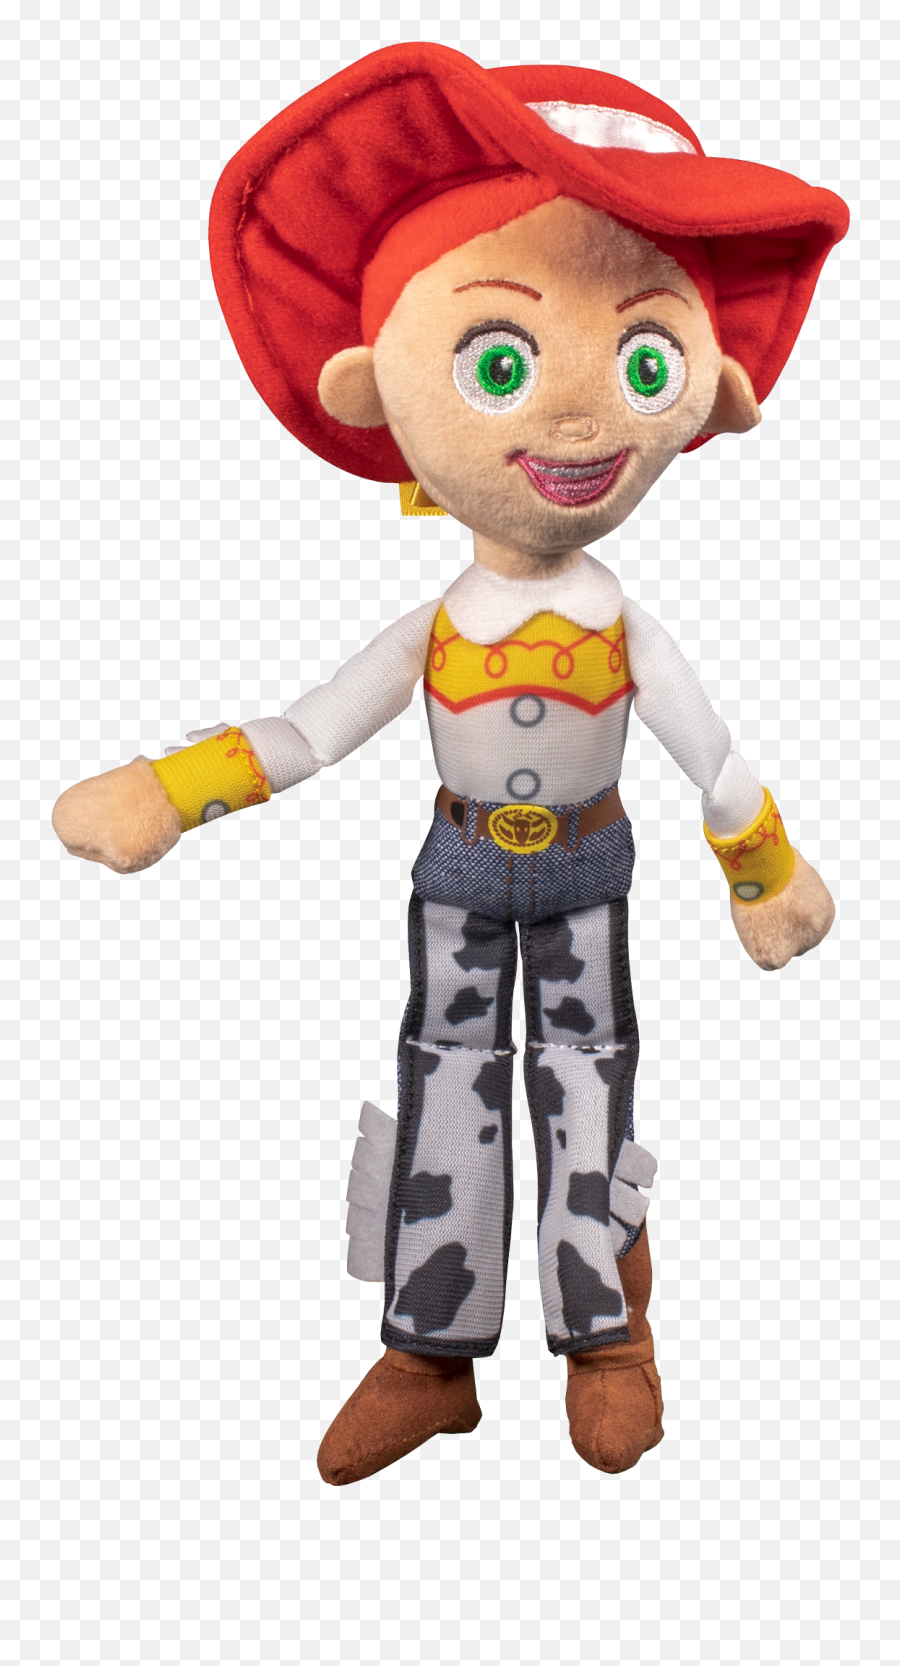 Toy Story 4 Jessie The Cowgirl Plush - Toy Story 4 Jessie Stuffed Toy Png,Jessie Toy Story Png